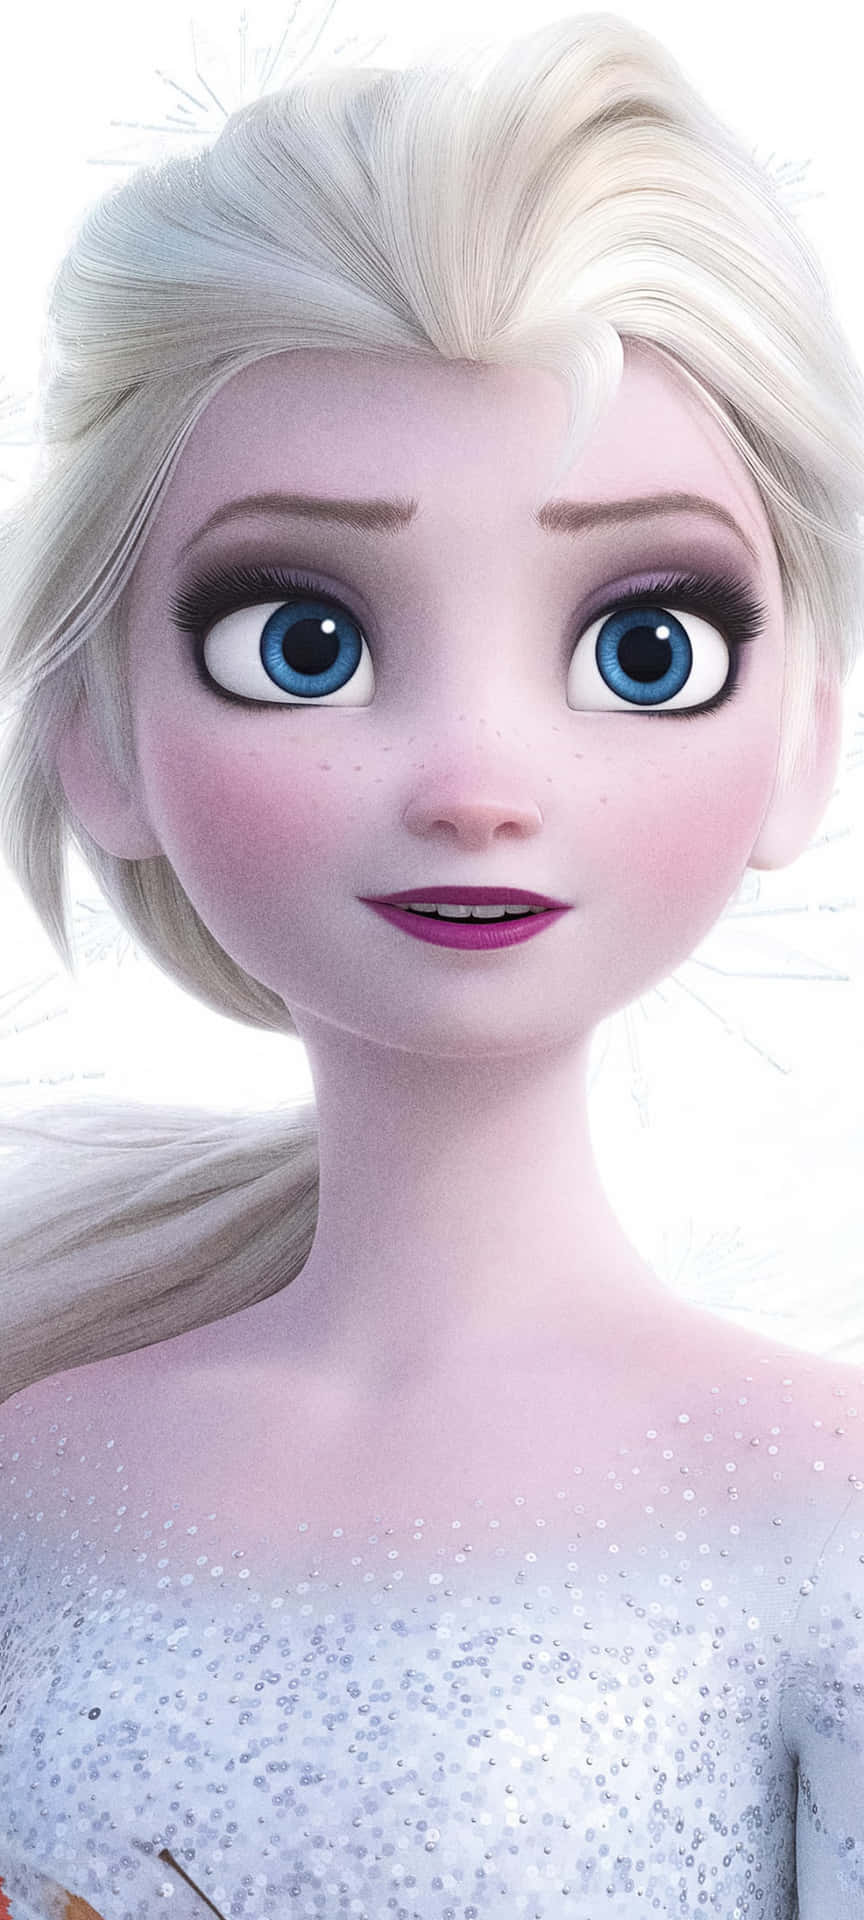 Elsa From Frozen Is Wearing A White Dress And Blue Eyes Wallpaper